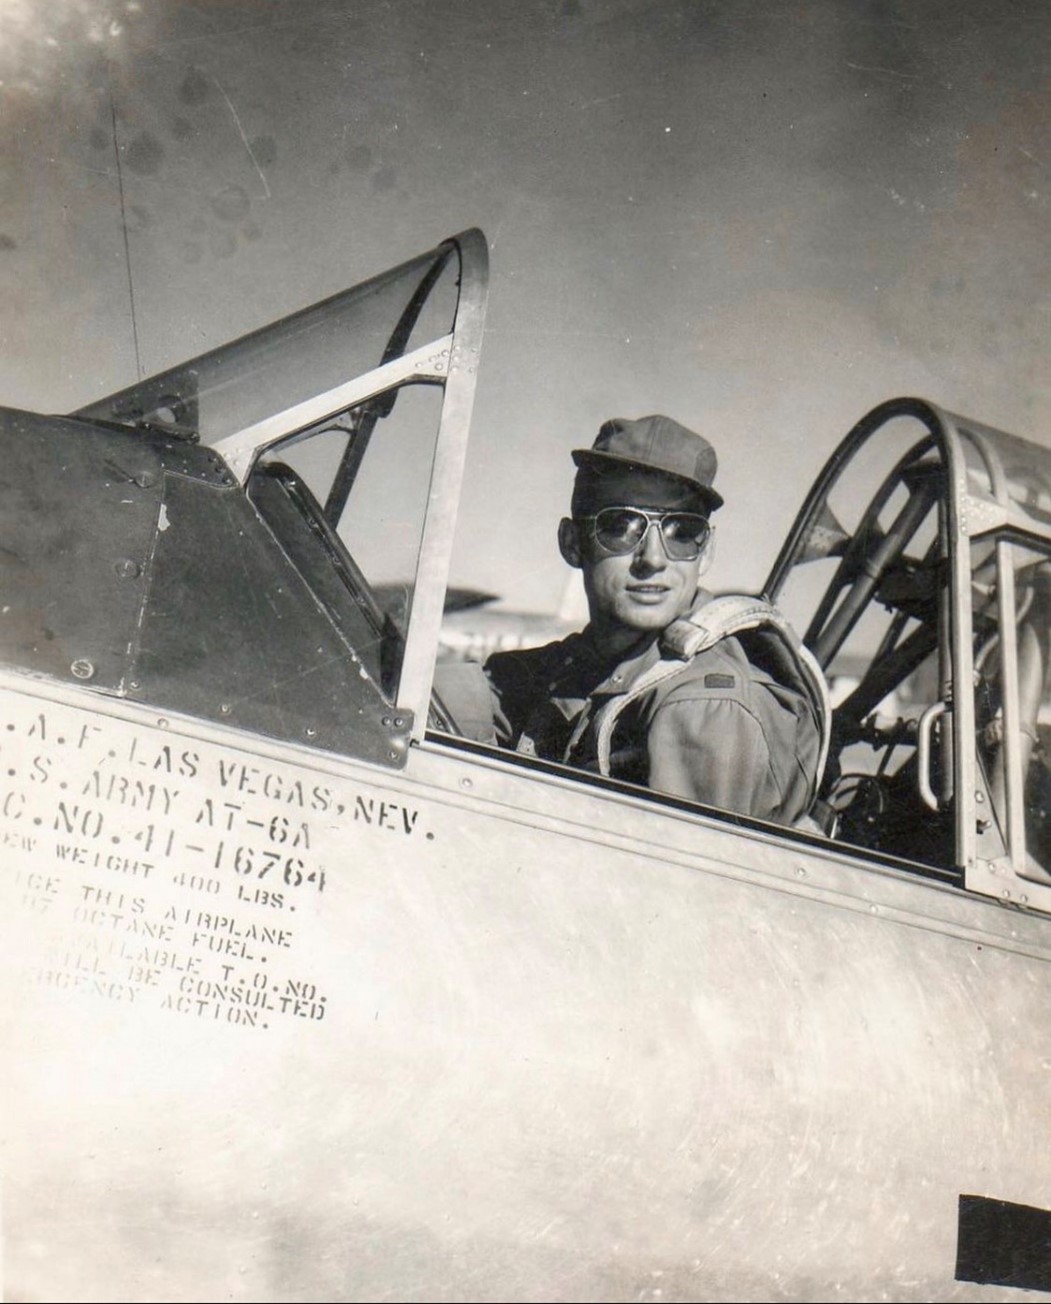 black and white picture of man flying a plane